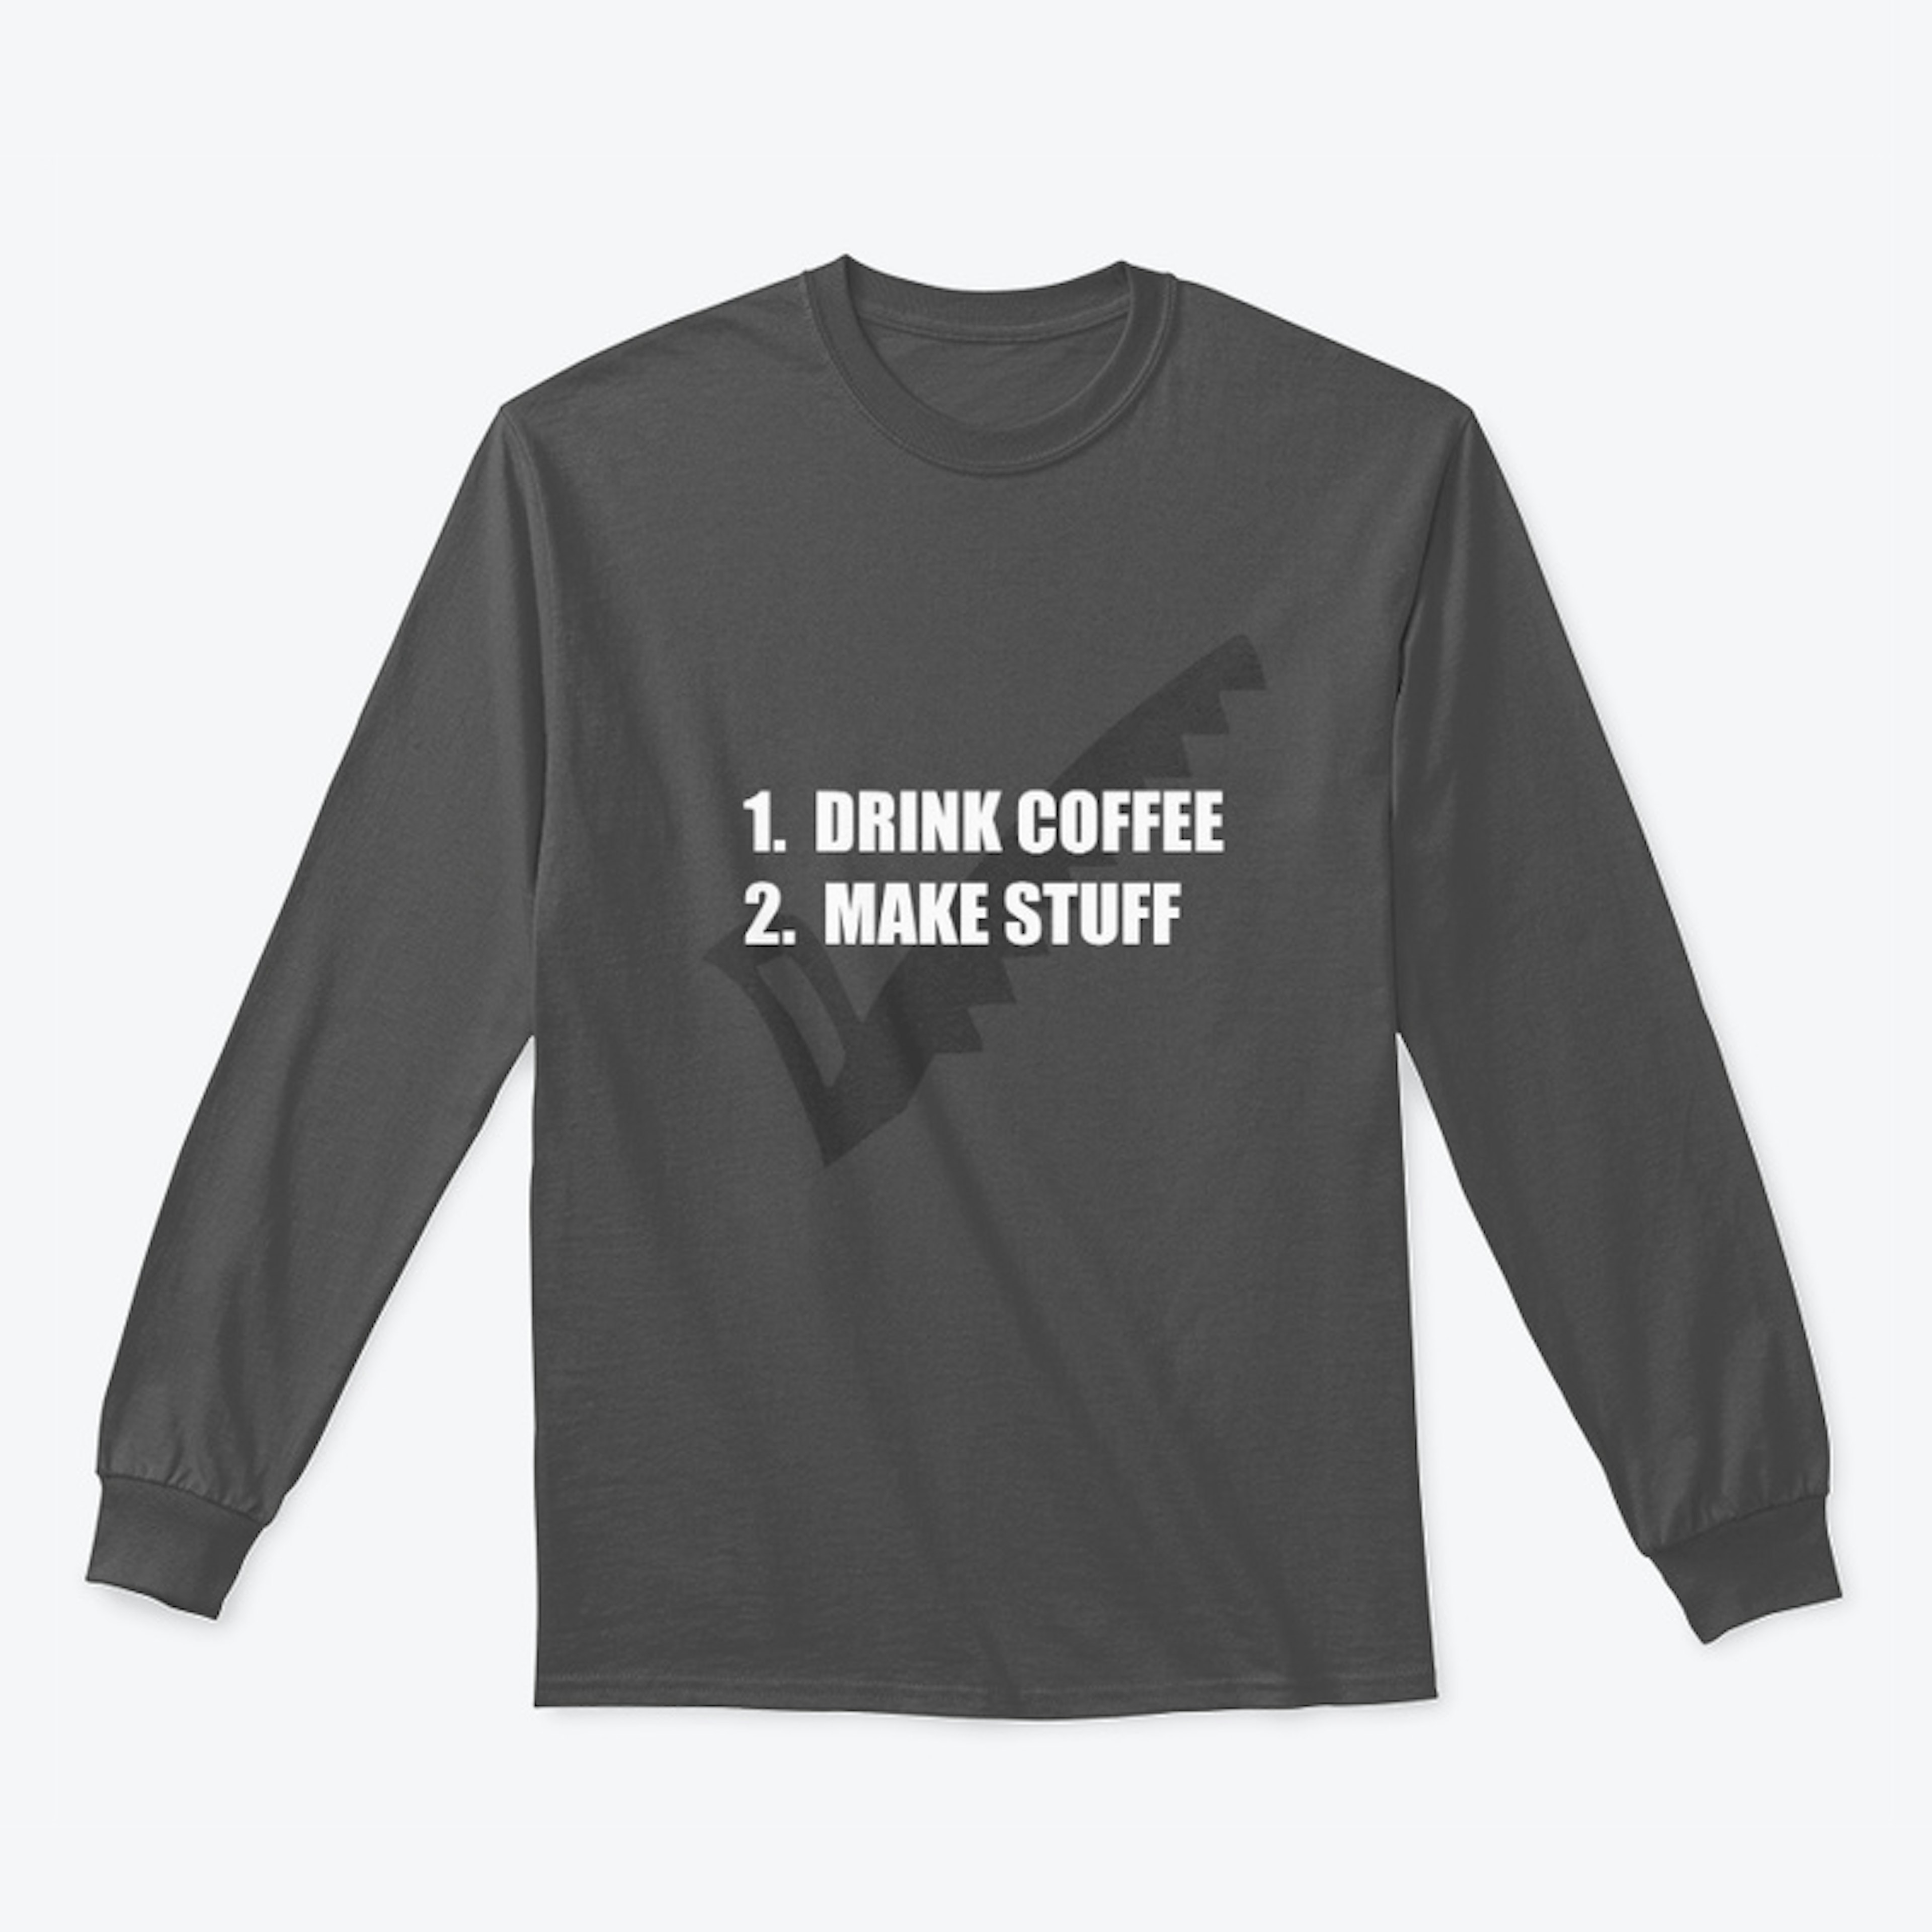 DRINK COFFEE MAKE STUFF OFFICIAL TOPS